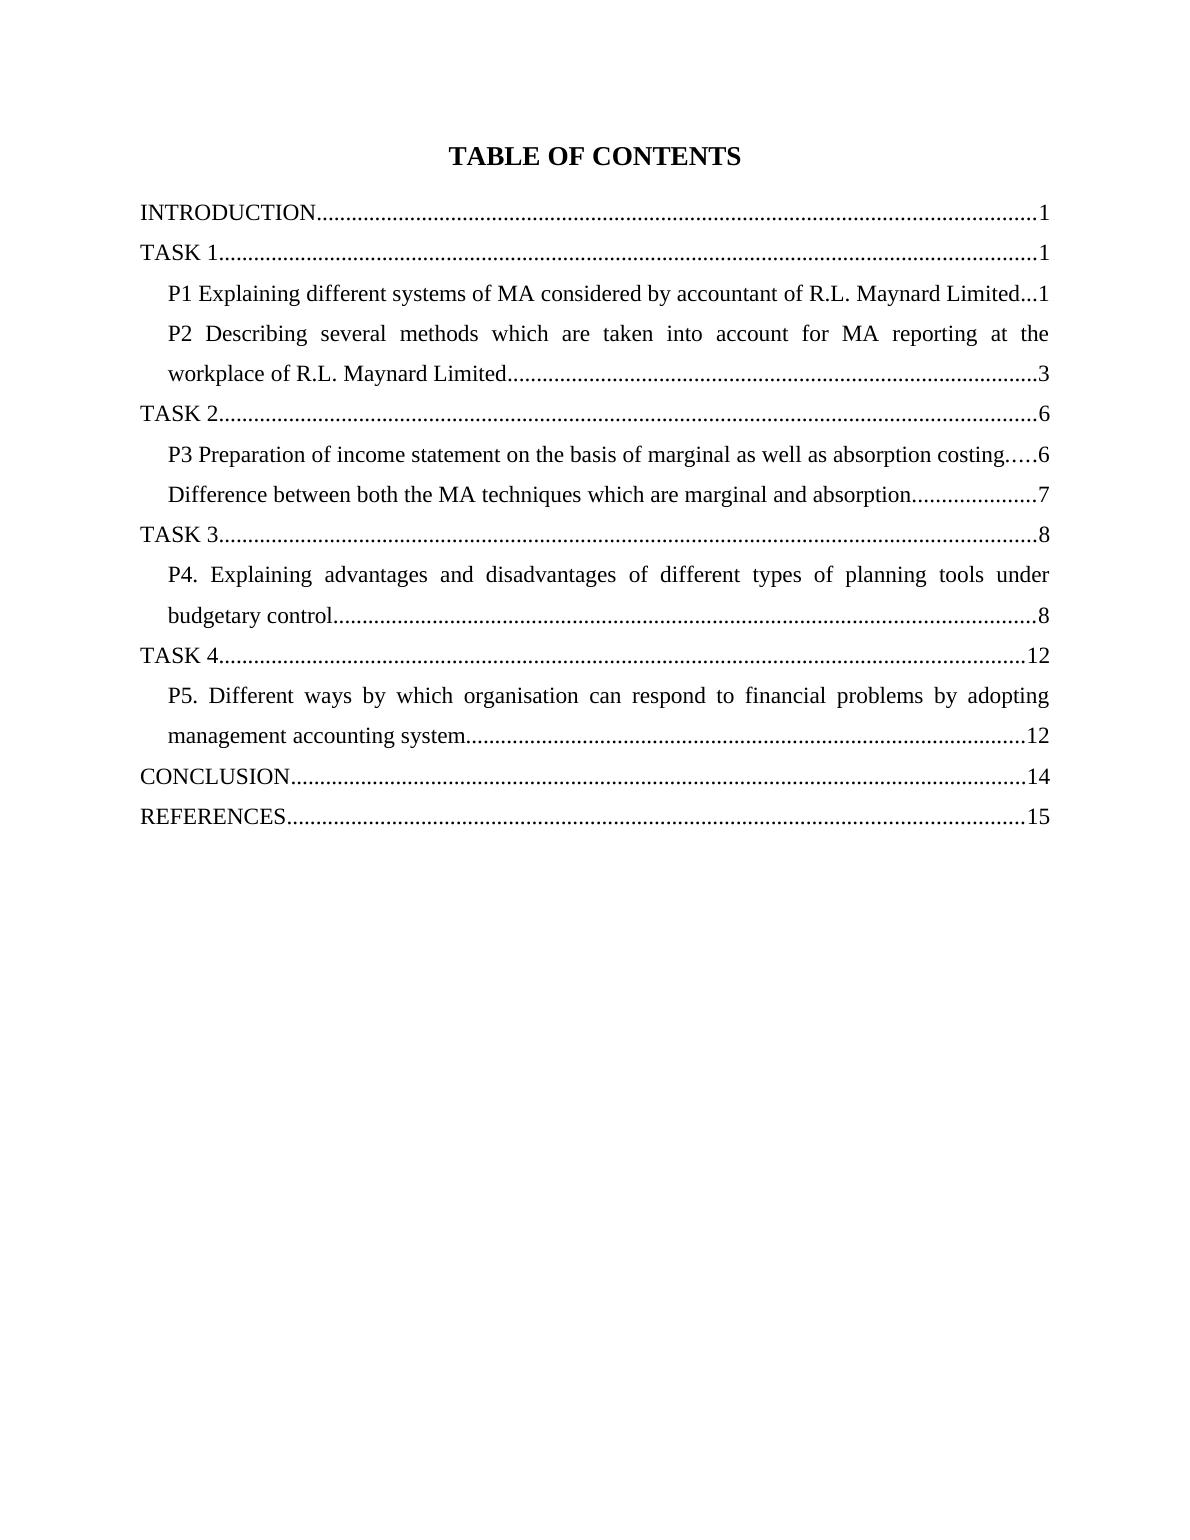 Report on Management Accounting and Its Benefits - R.L. Maynard Limited_2